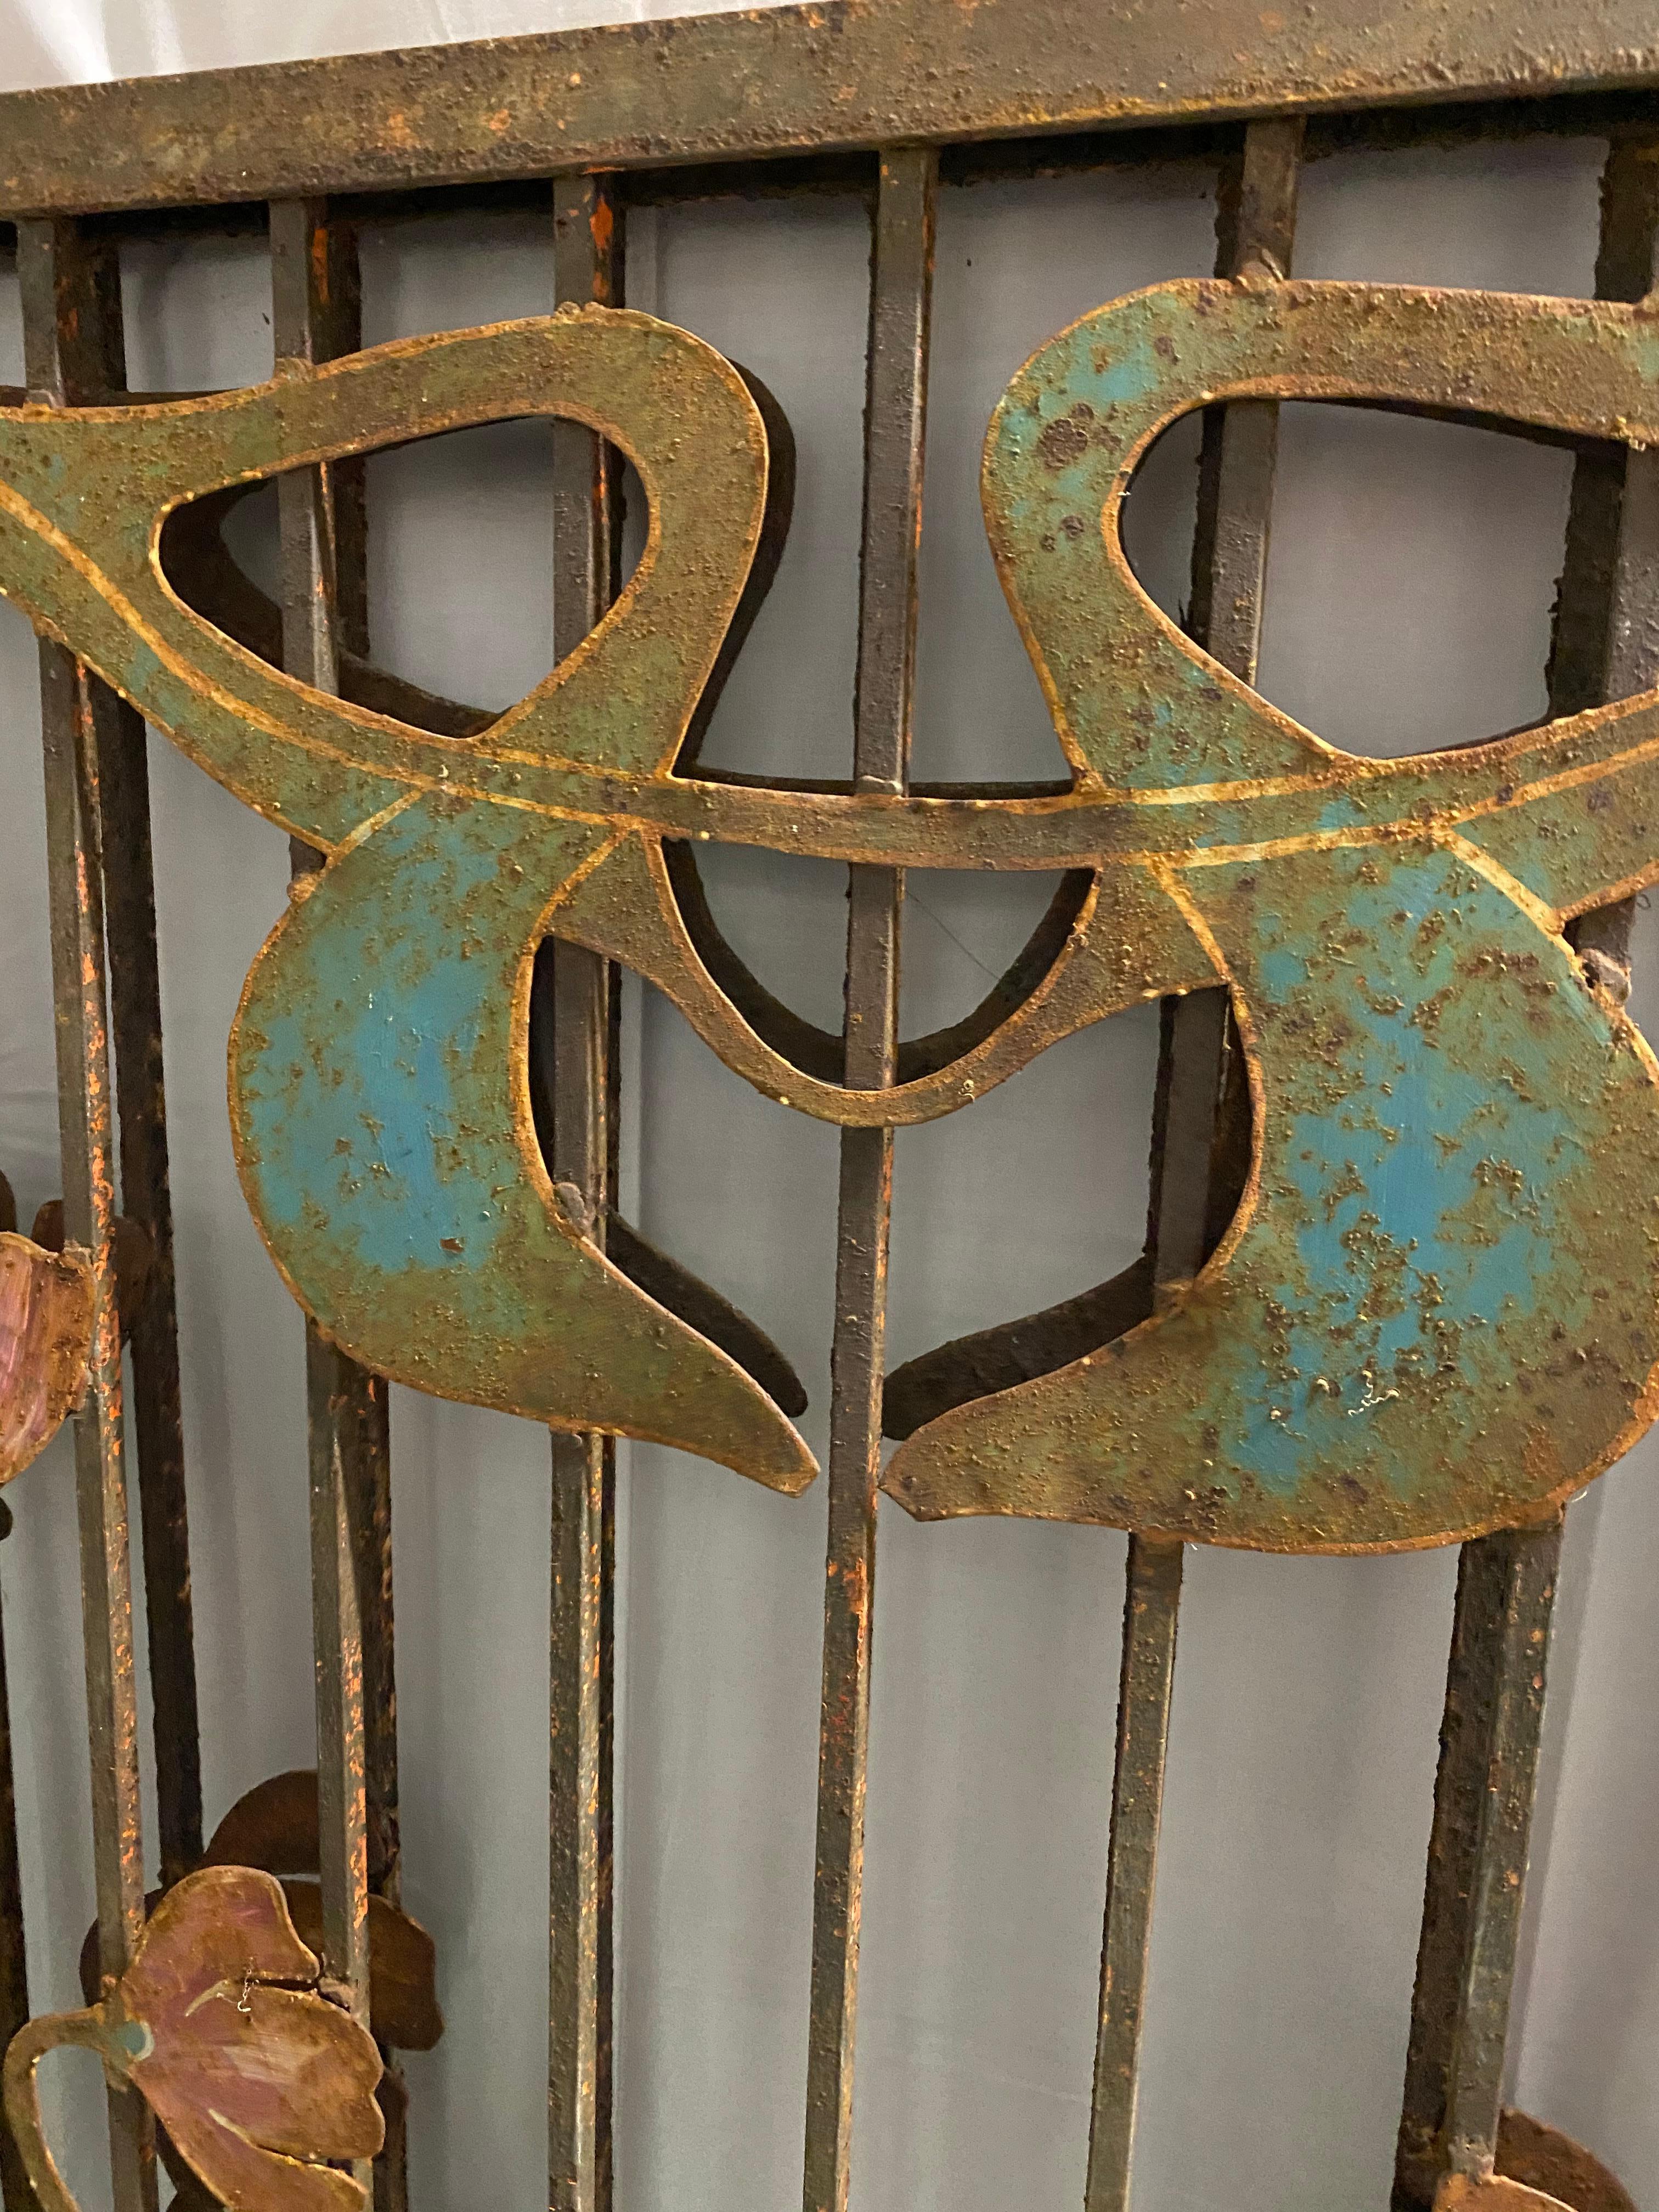 Pair of French Art Nouveau Wrought Iron Garden Gates, Early 20th Century For Sale 3